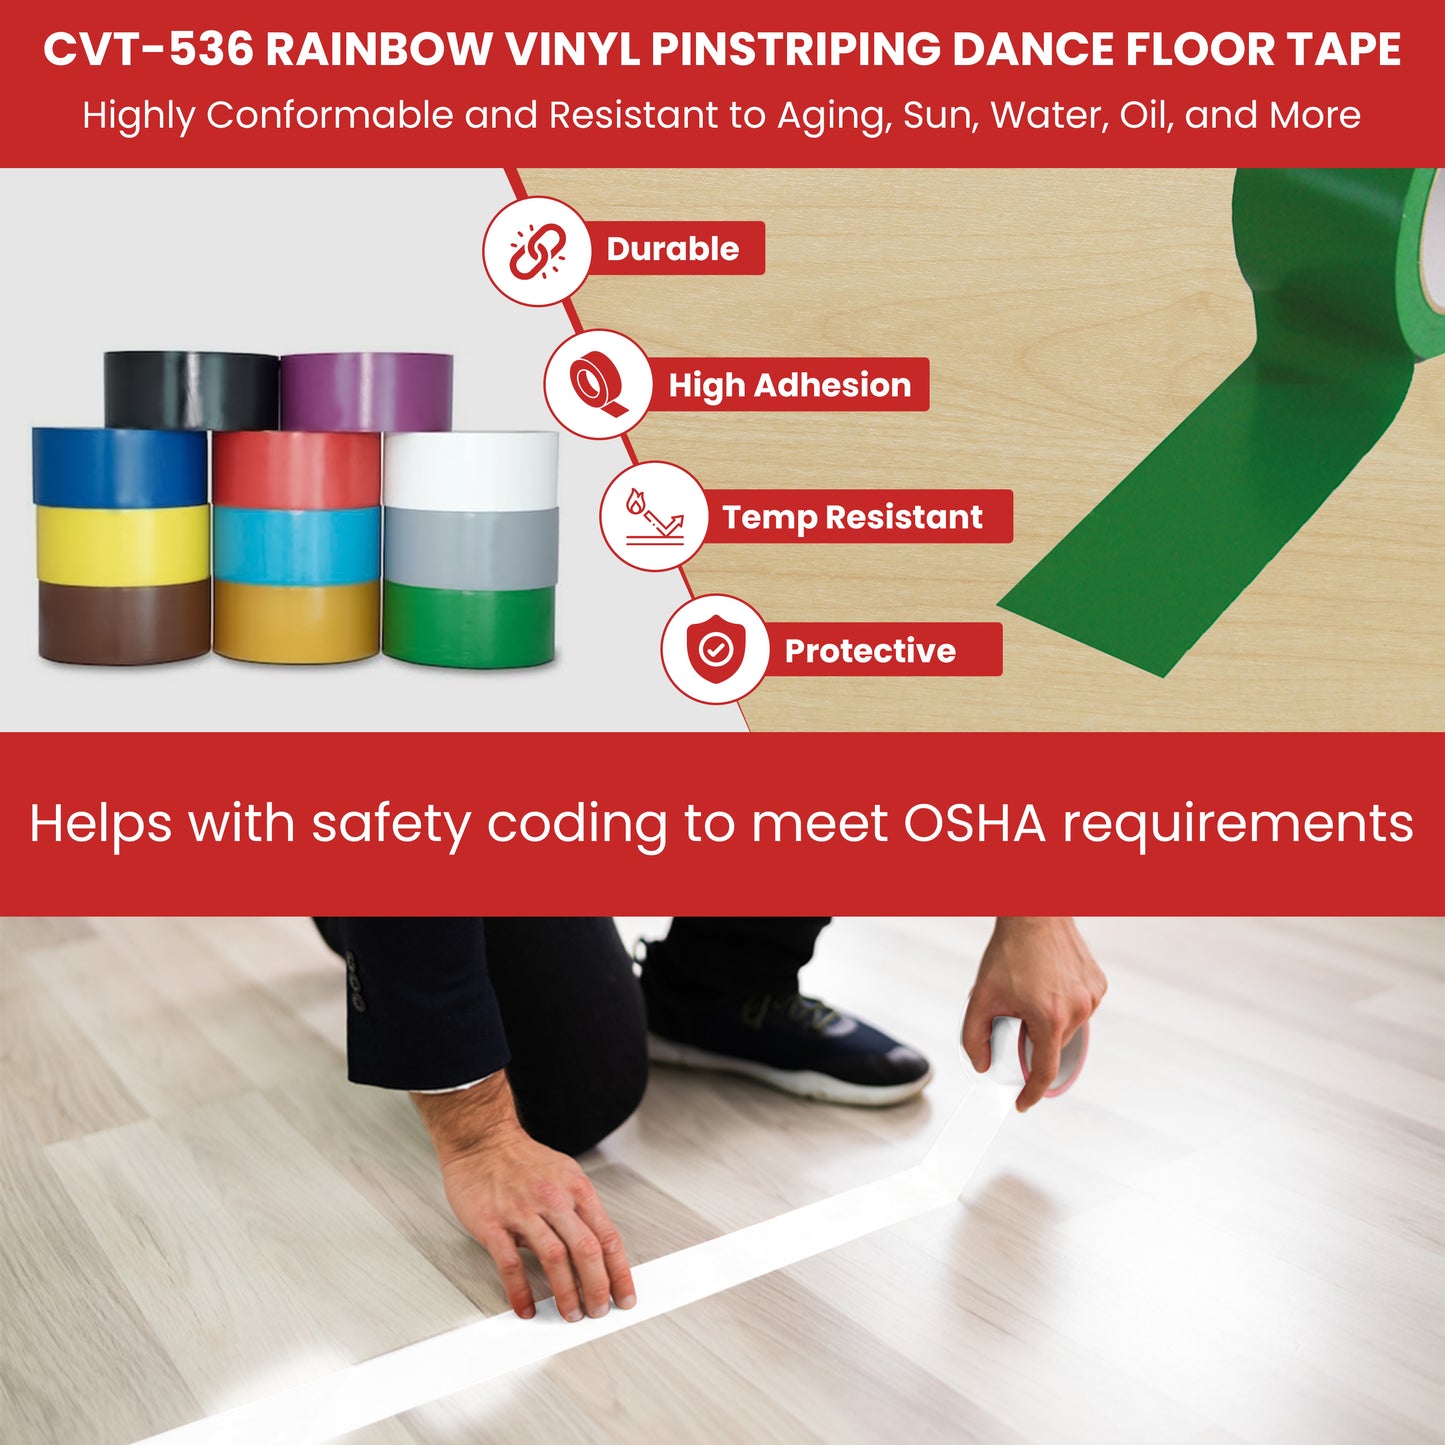 Colored Vinyl Tape or Pin-striping Tape